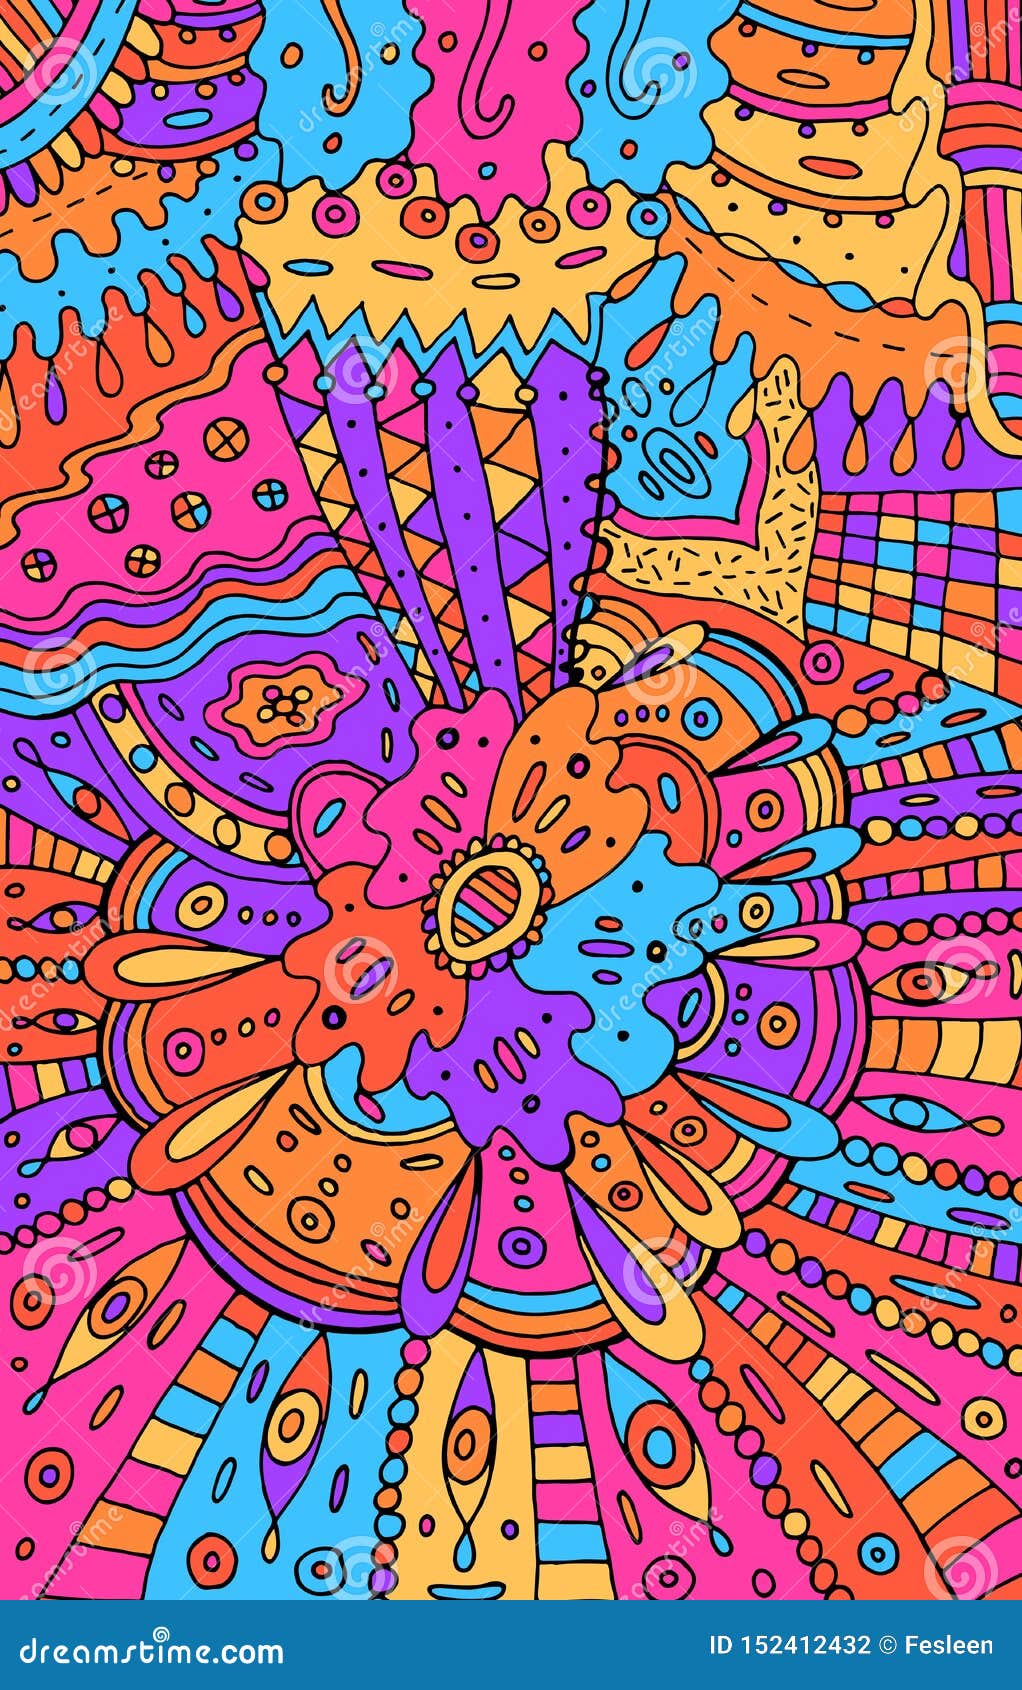 Featured image of post Trippy Doodles Colorful Looking for an aqua doodle pad